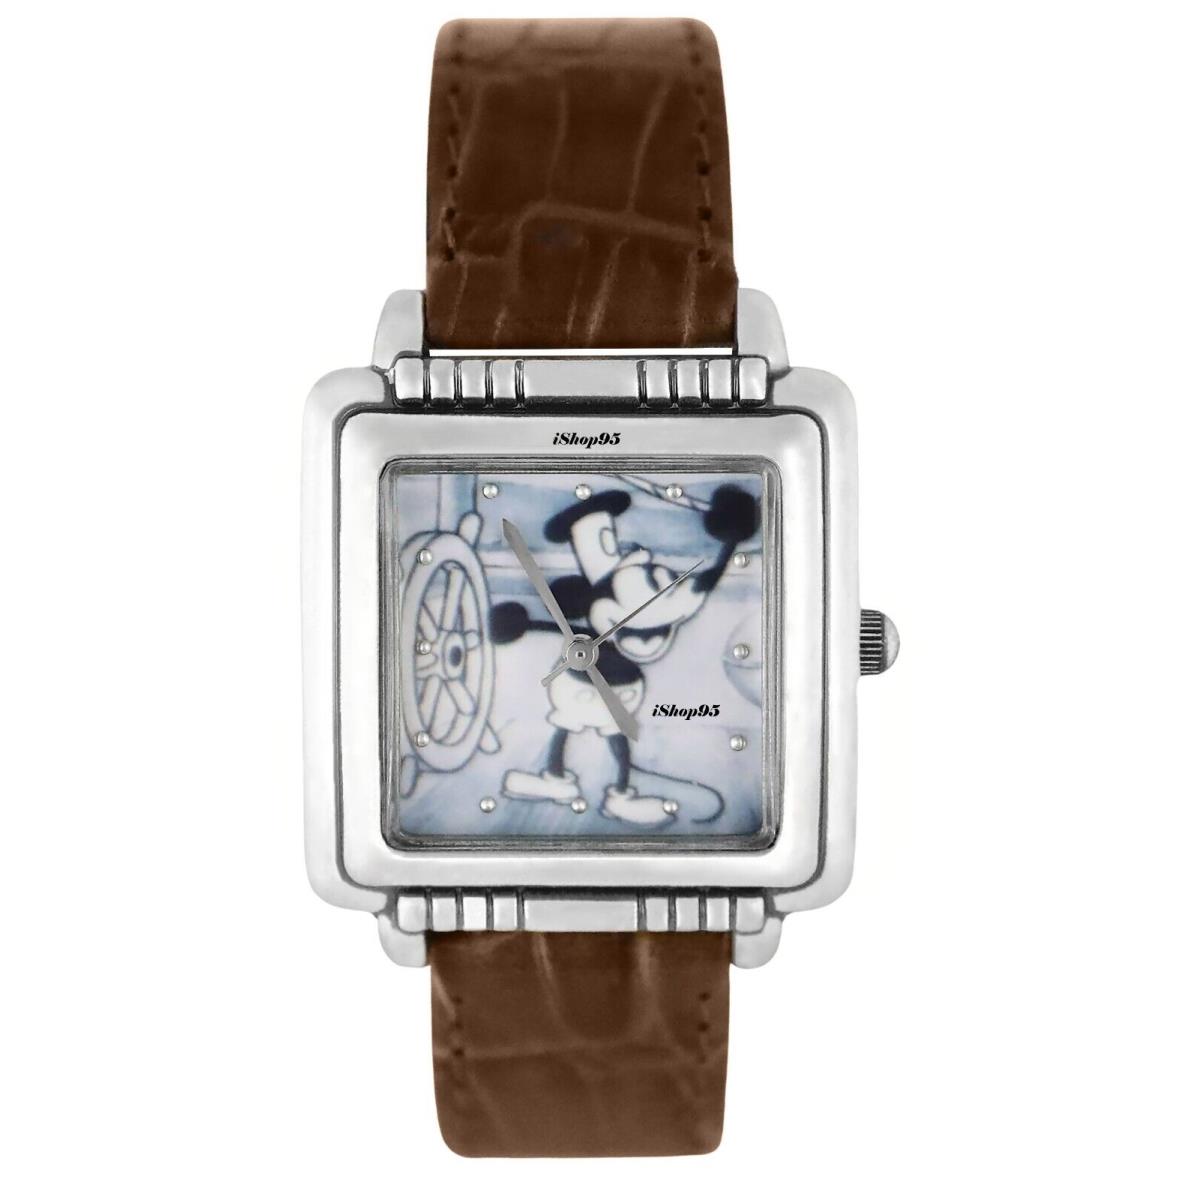 Disney Fossil Mickey Mouse Steamboat Willie 1928 Watch Collectible